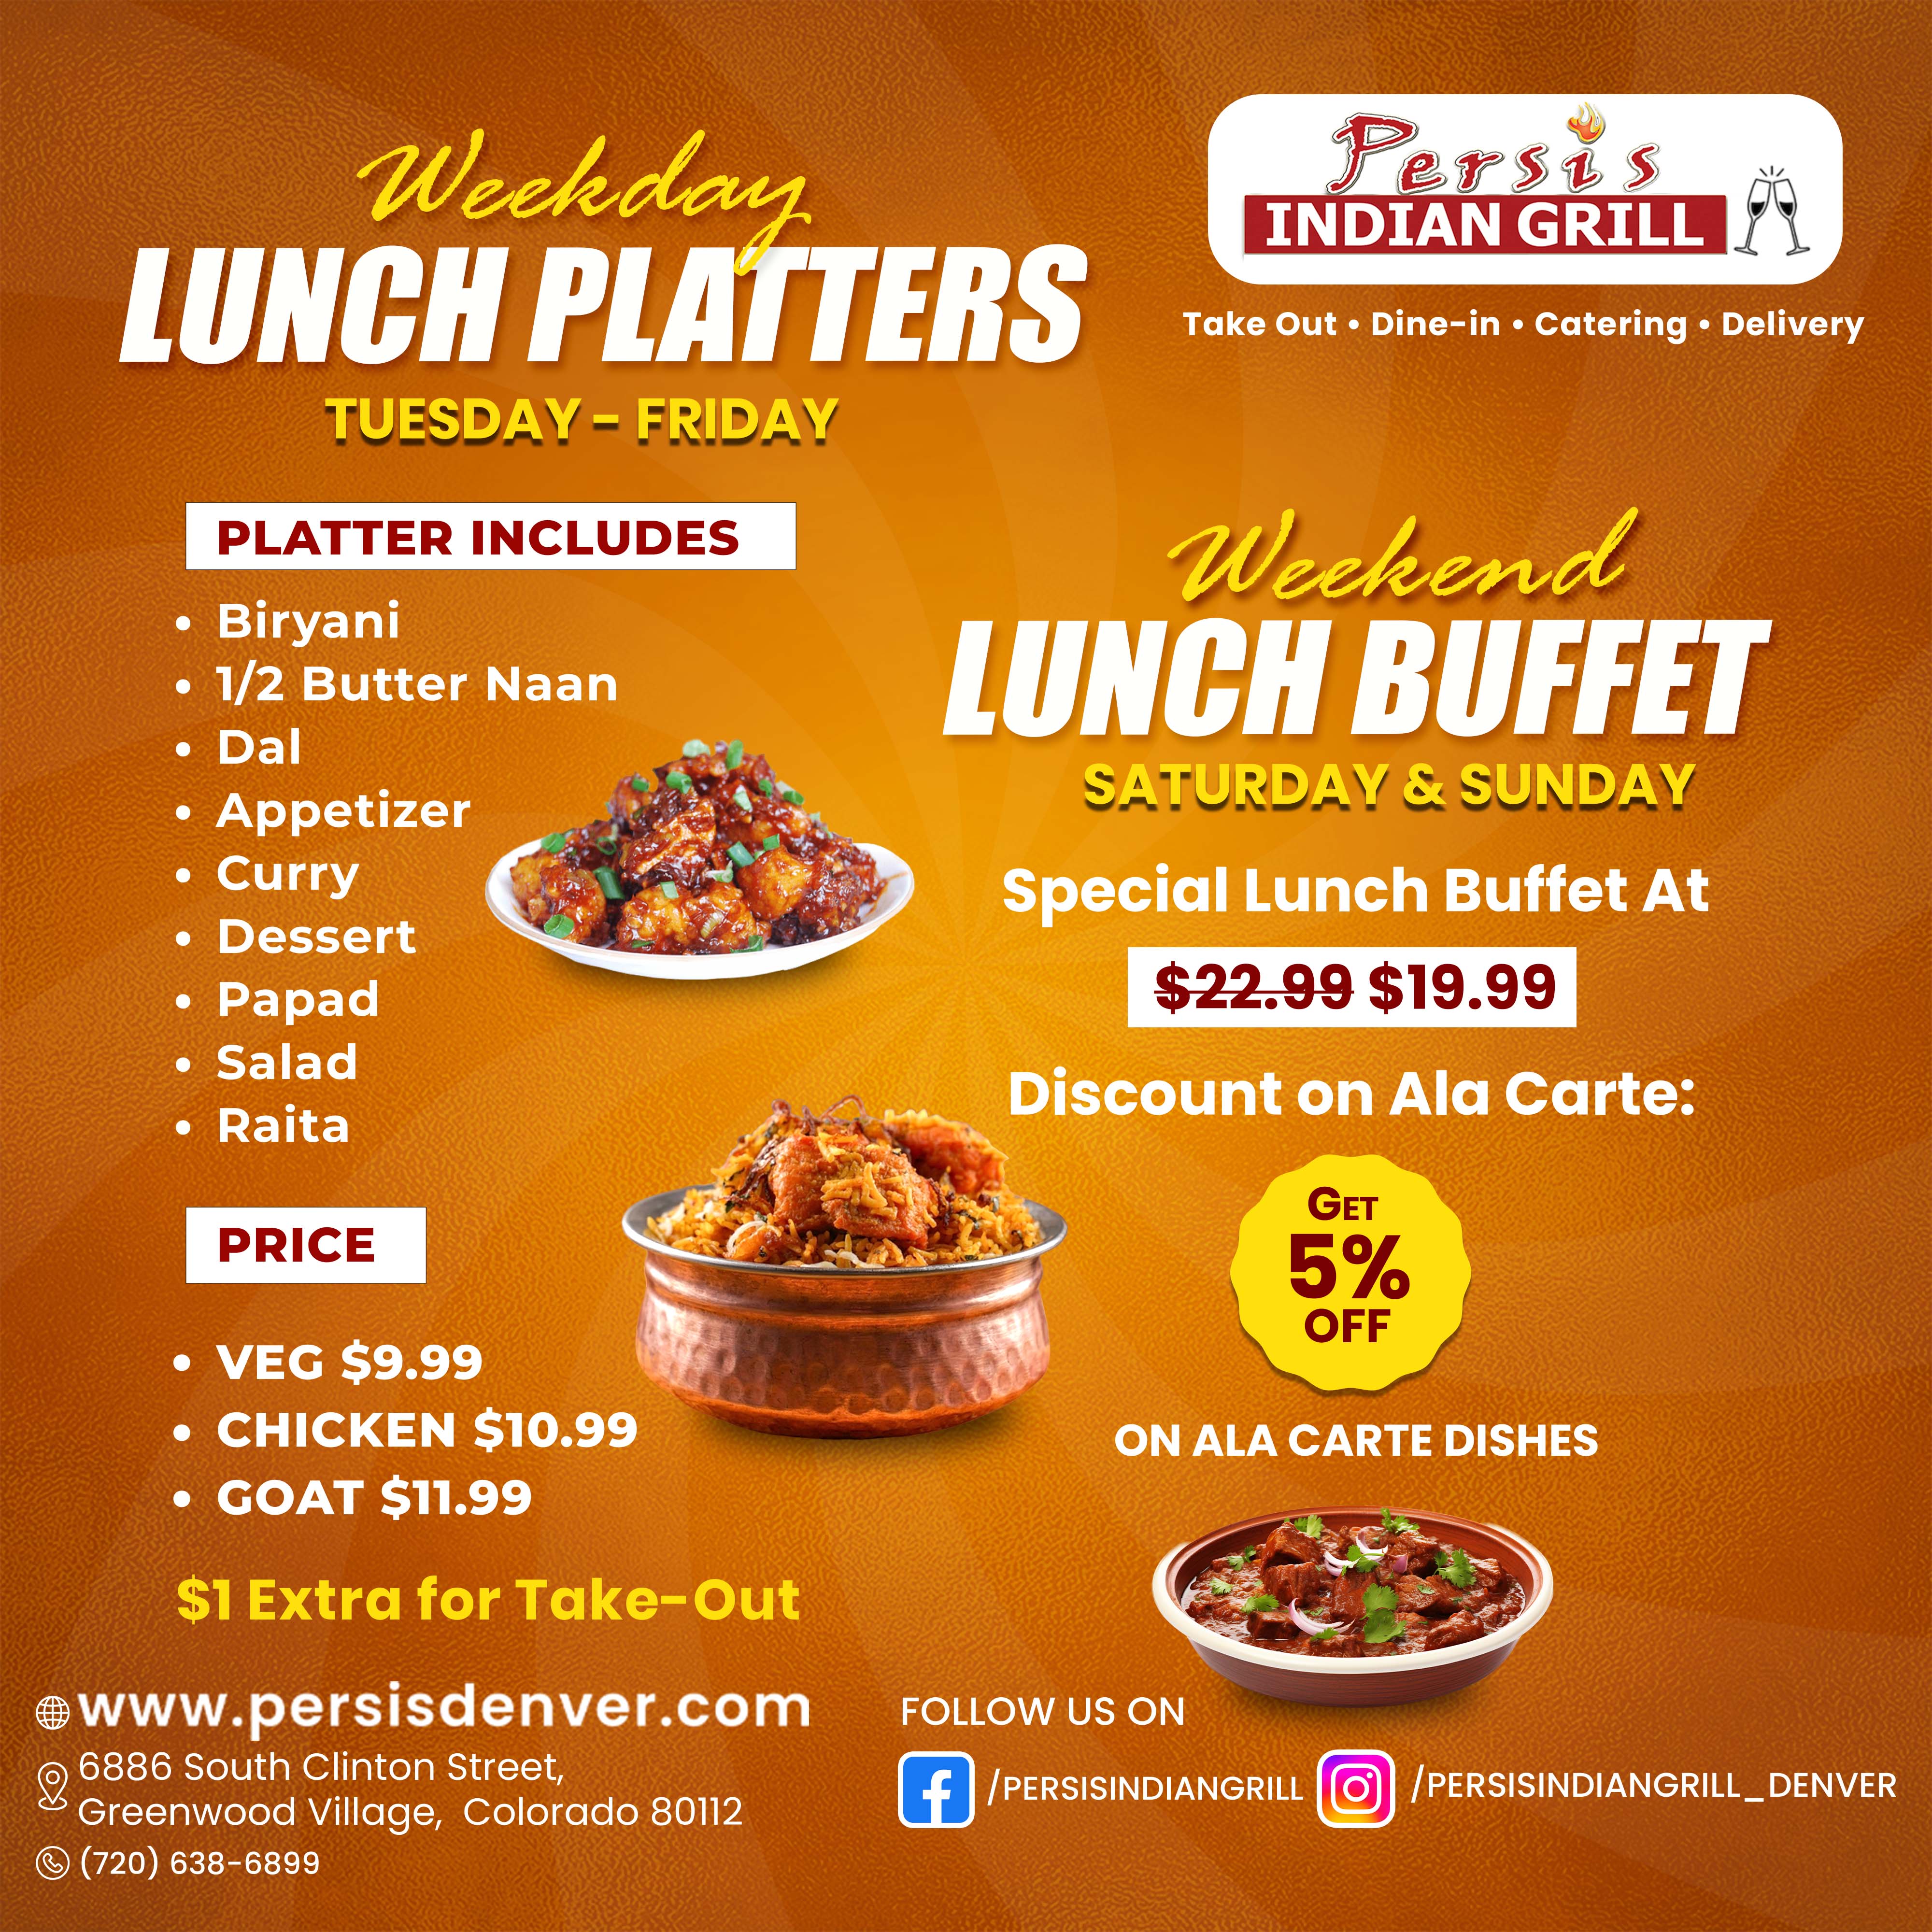 Weekday Lunch Platters and Weekend Lunch Buffet